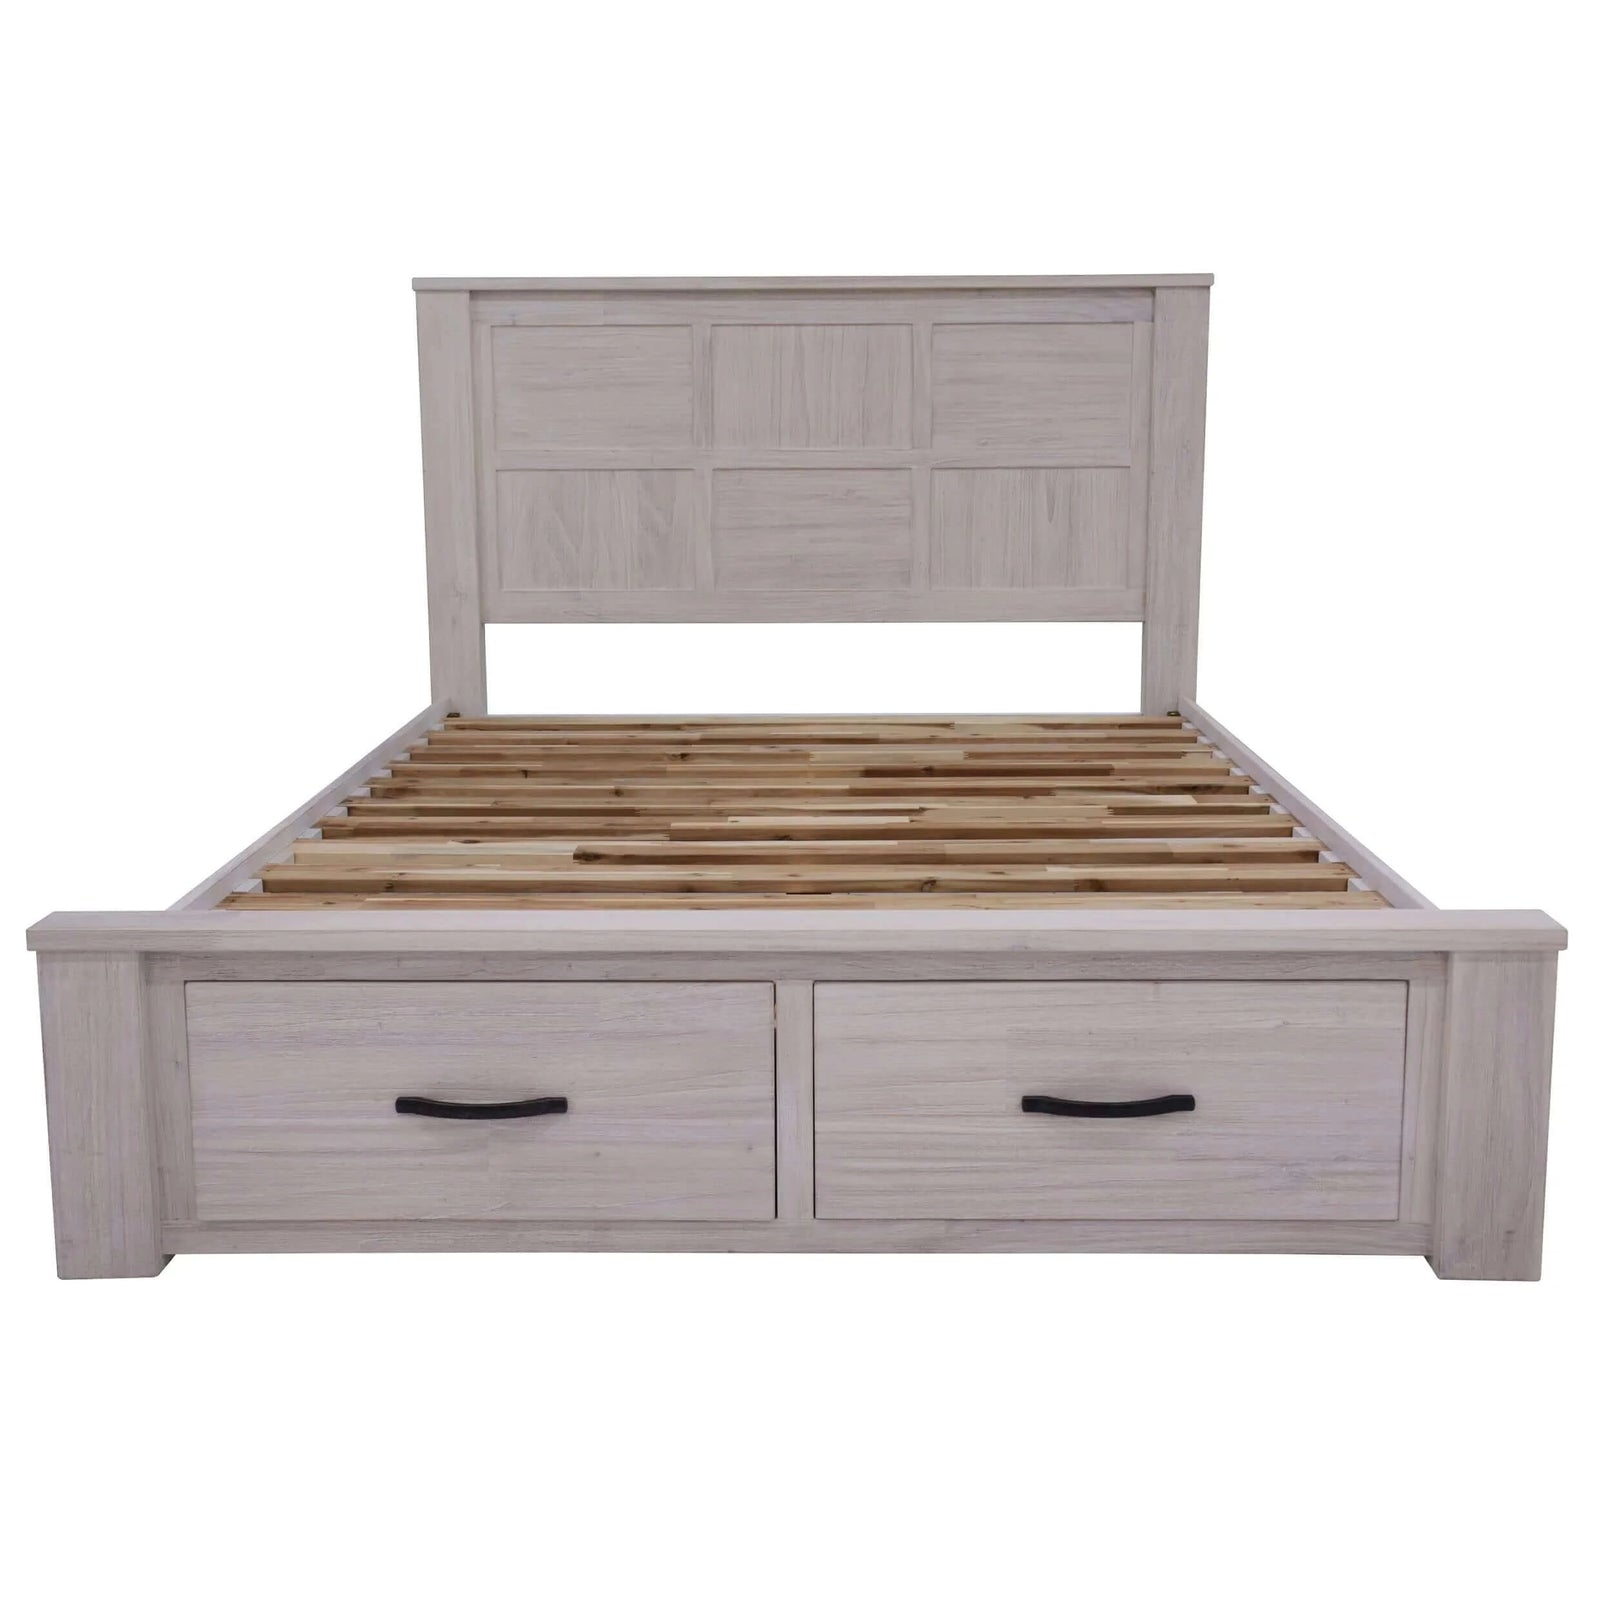 Buy foxglove bed frame double size wood mattress base with storage drawers - white - upinteriors-Upinteriors